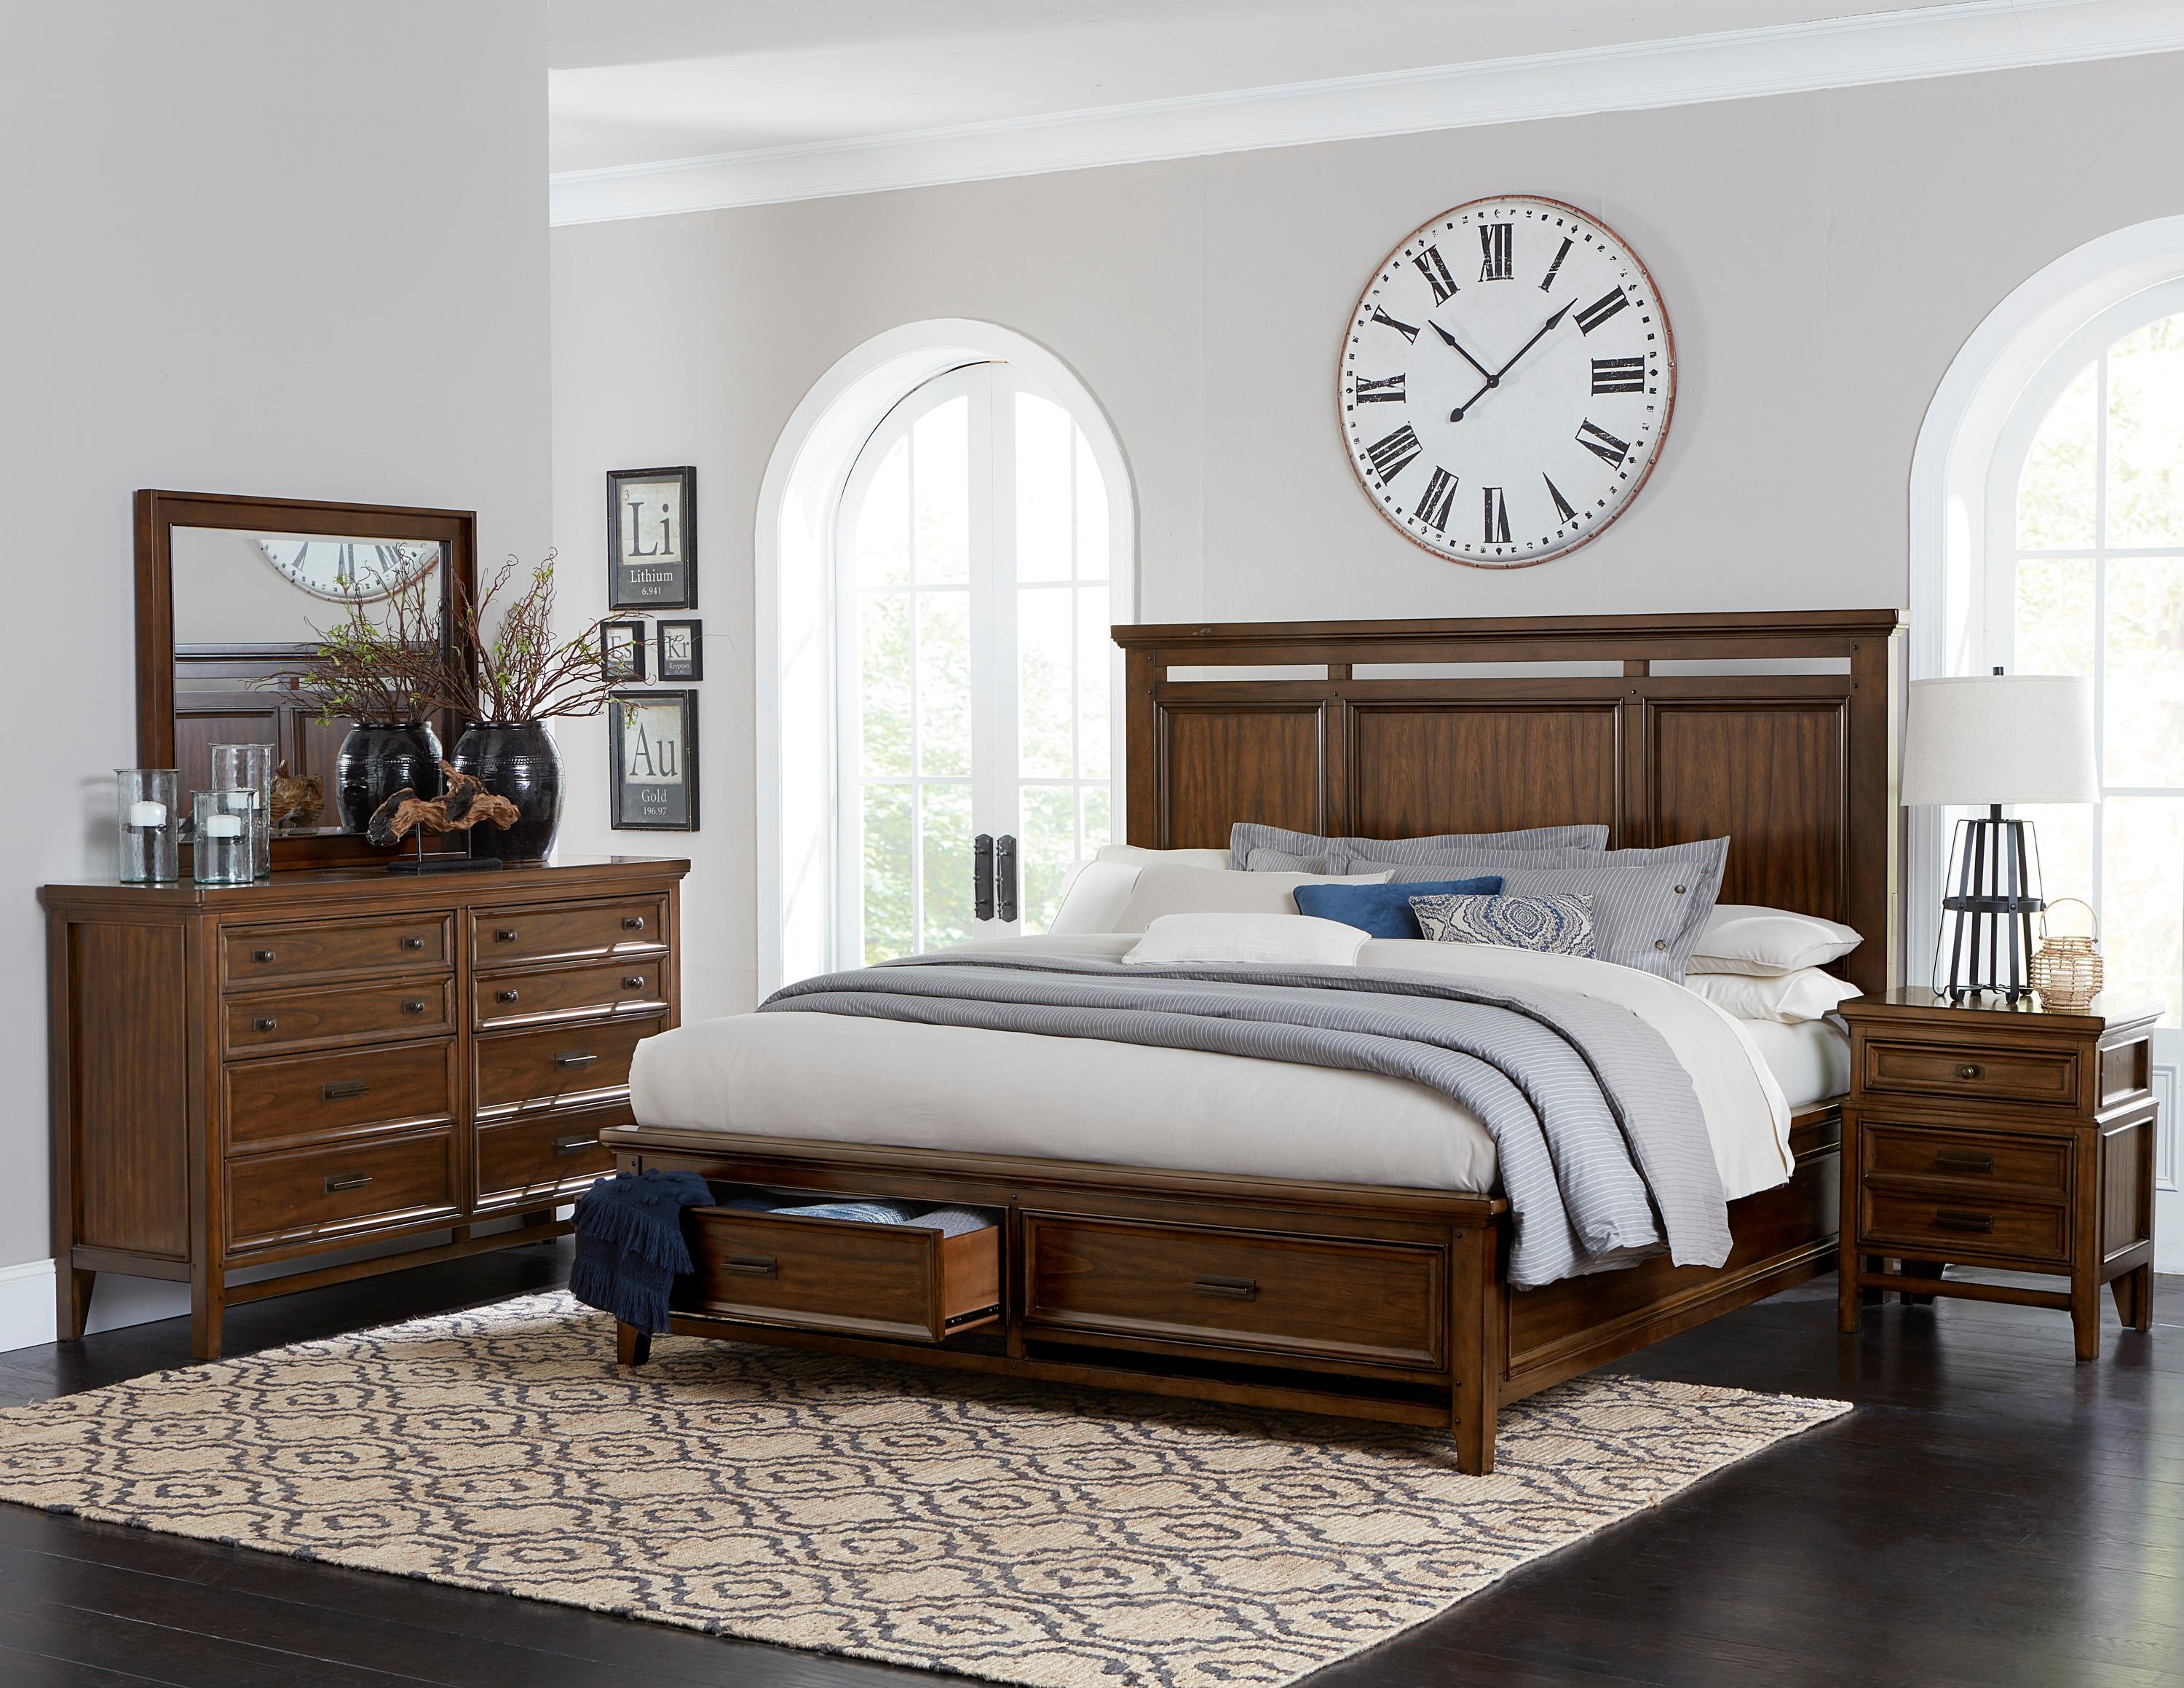 Classic Bedroom Set 1649-1-6PC Frazier Park 1649-1-6PC in Cherry 